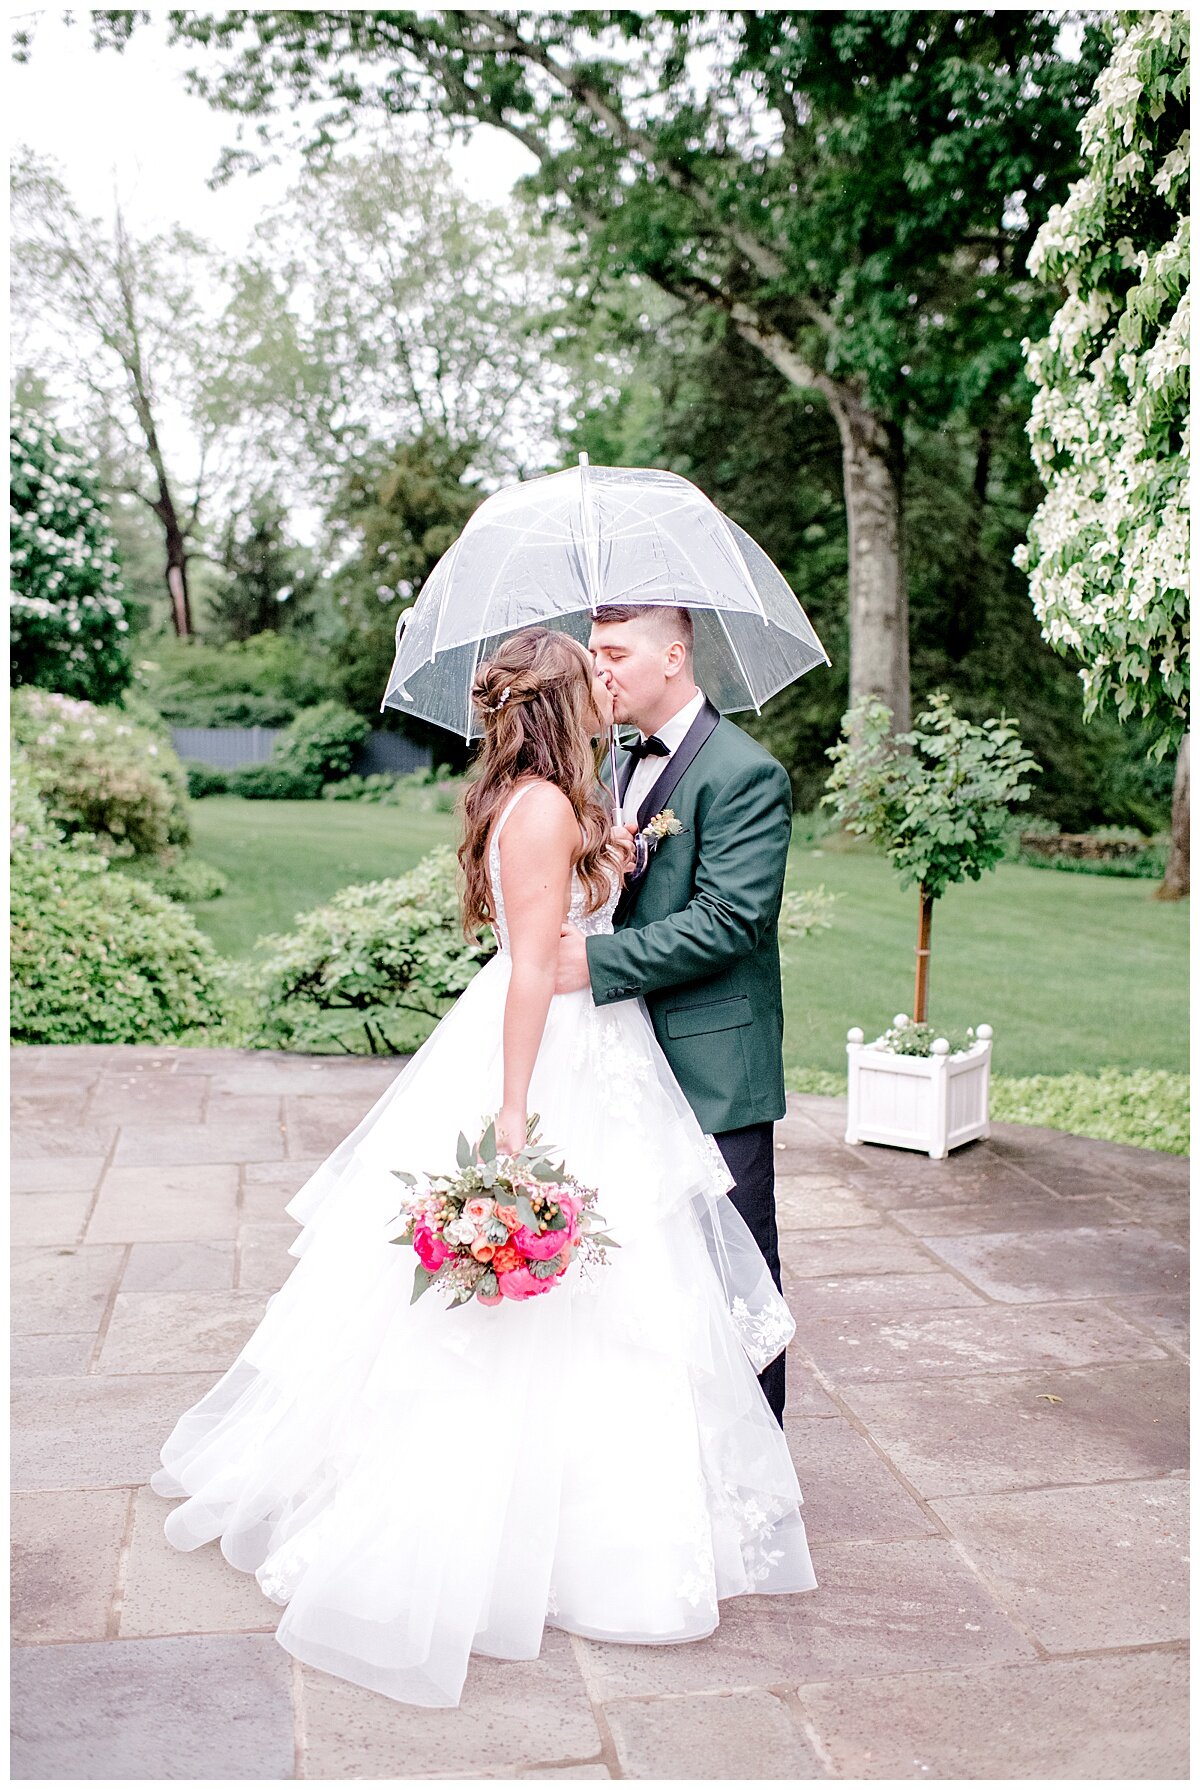 bride and groom kissing under an umbrella in the rain